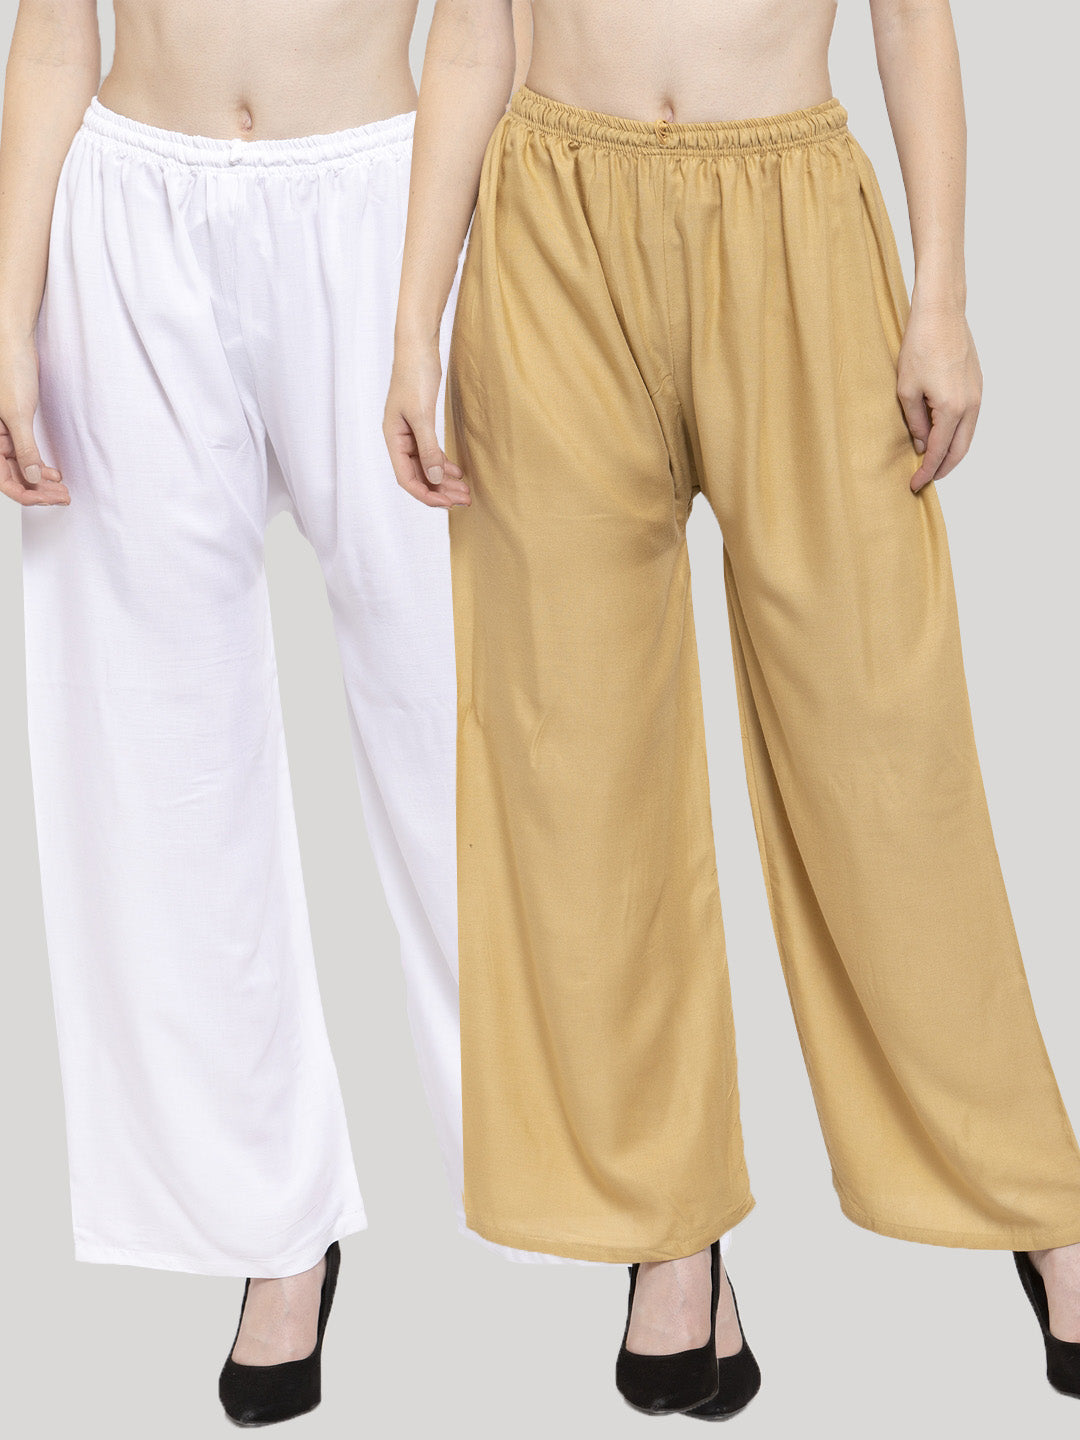 Women's Solid White & Fawn Rayon Palazzo (Pack Of 2) - Wahe-NOOR